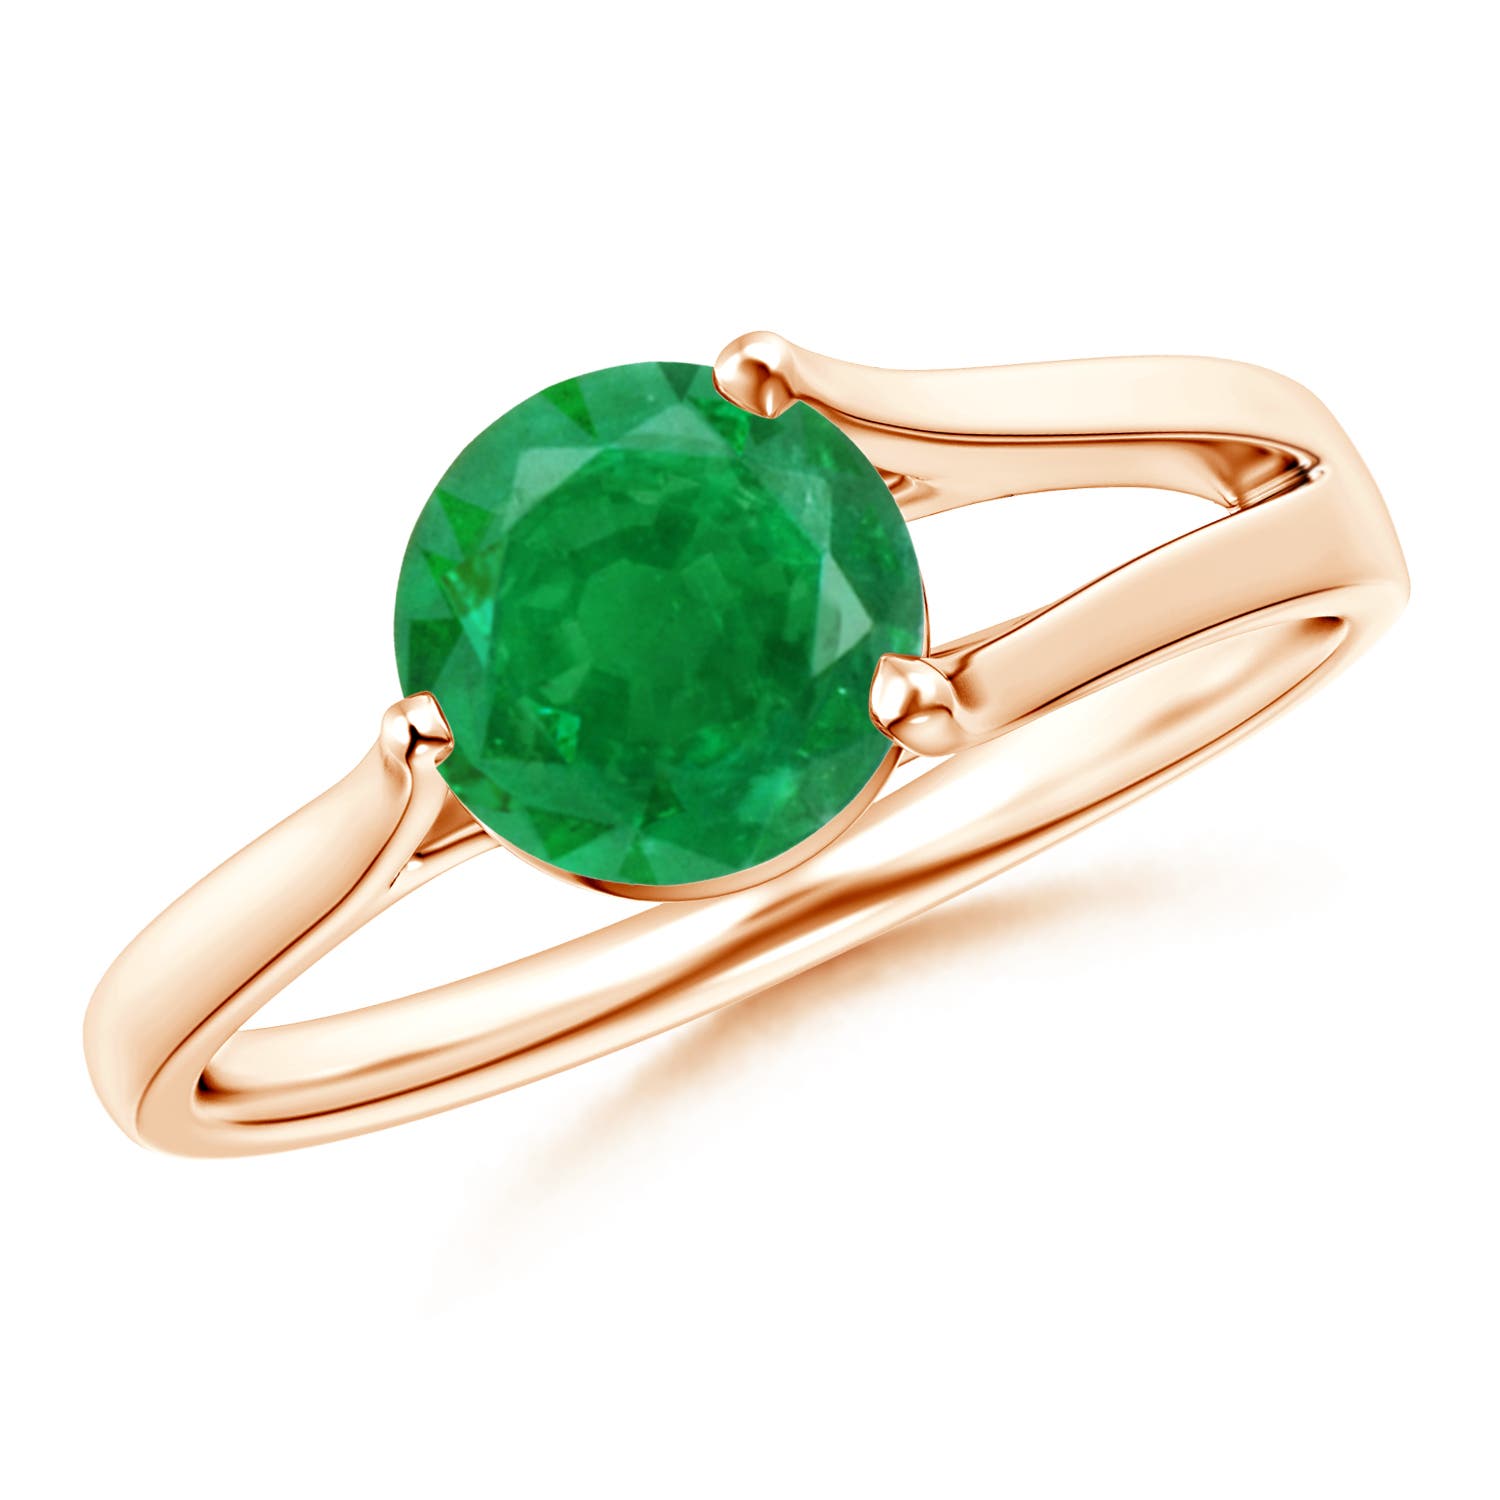 AA - Emerald / 1.2 CT / 14 KT Rose Gold